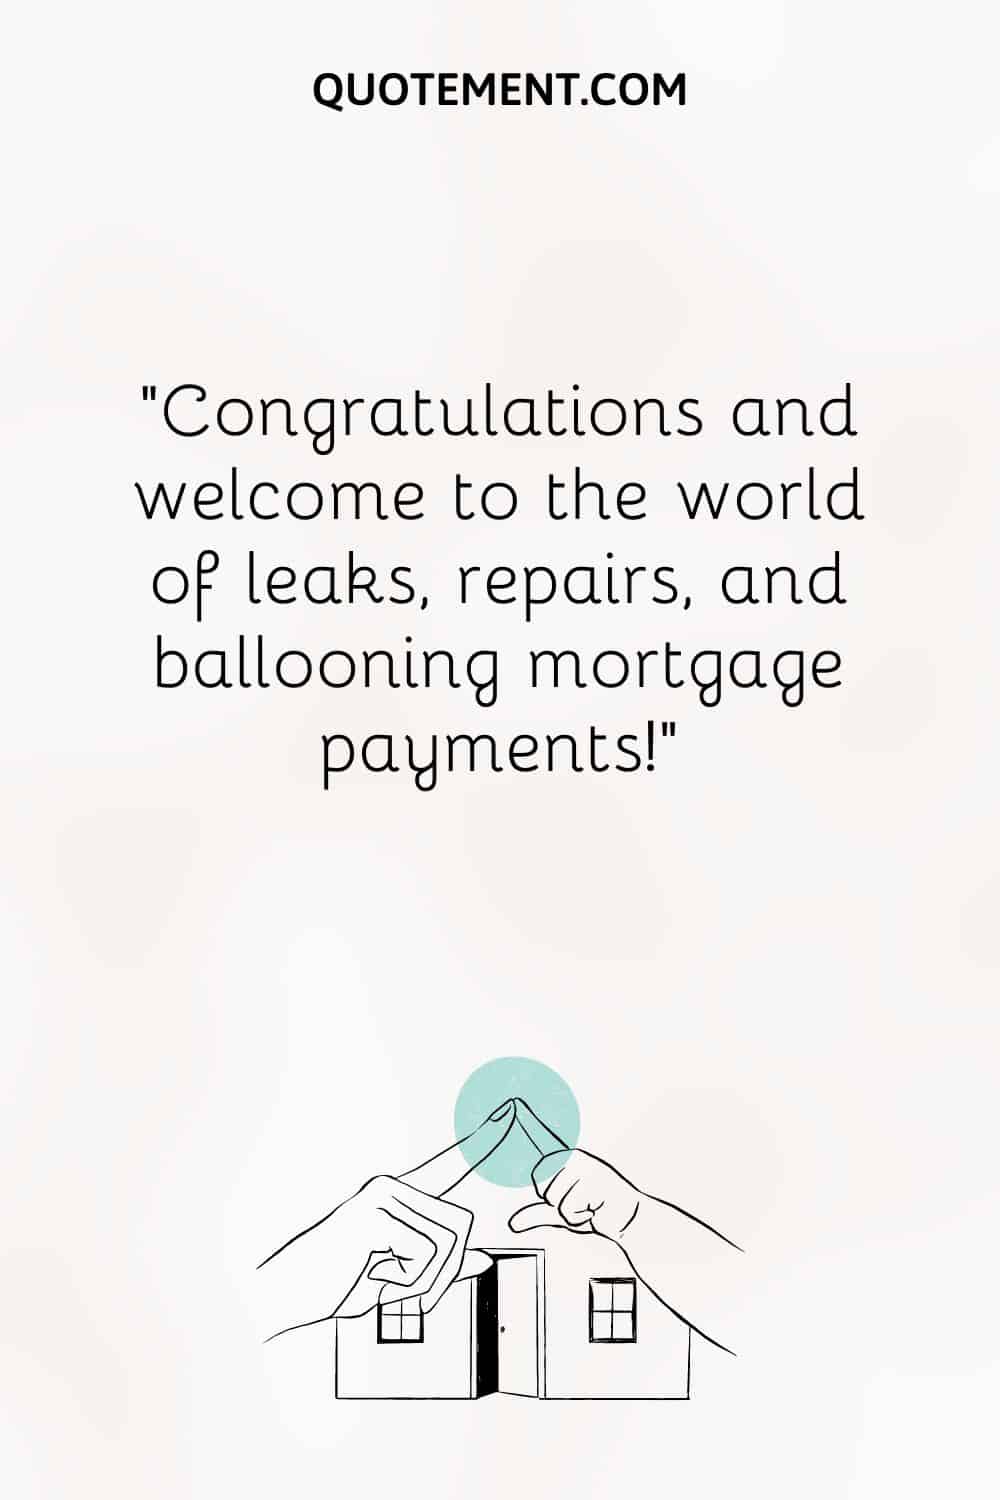 Congratulations, and welcome to the world of leaks, repairs, and ballooning mortgage payments